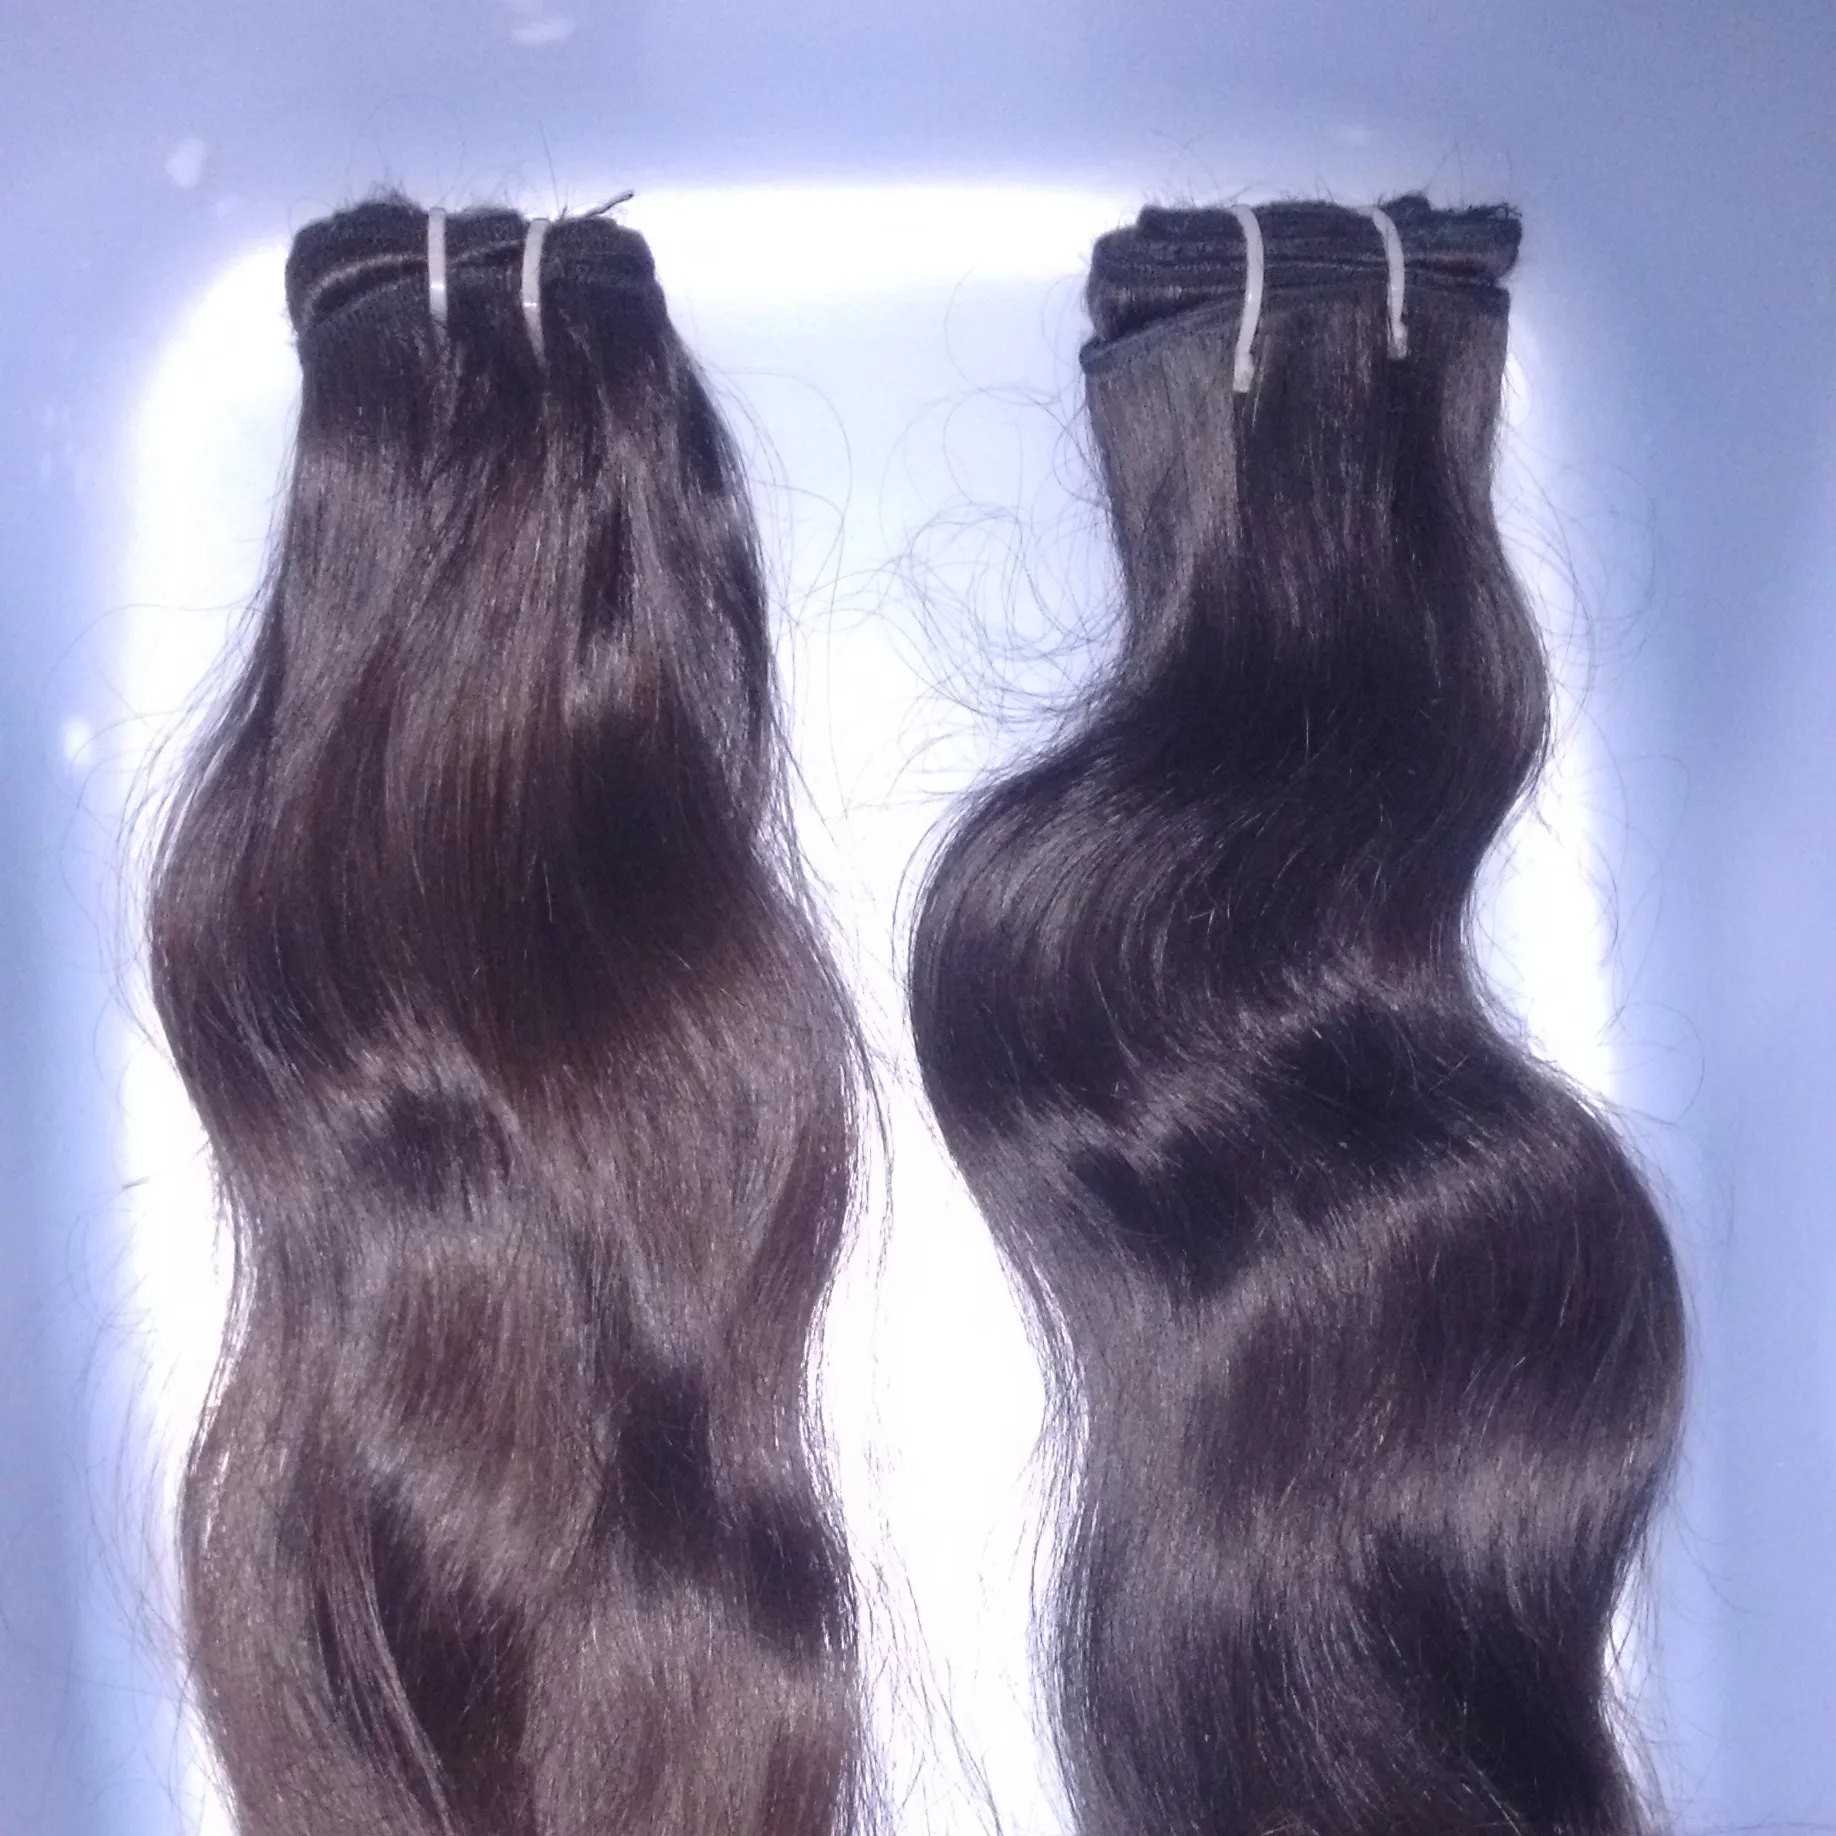 Temple hair weaving from india.How To Start Selling Virgin Remy Human Hair Weave texture Indian Remy Human Hair For Sale